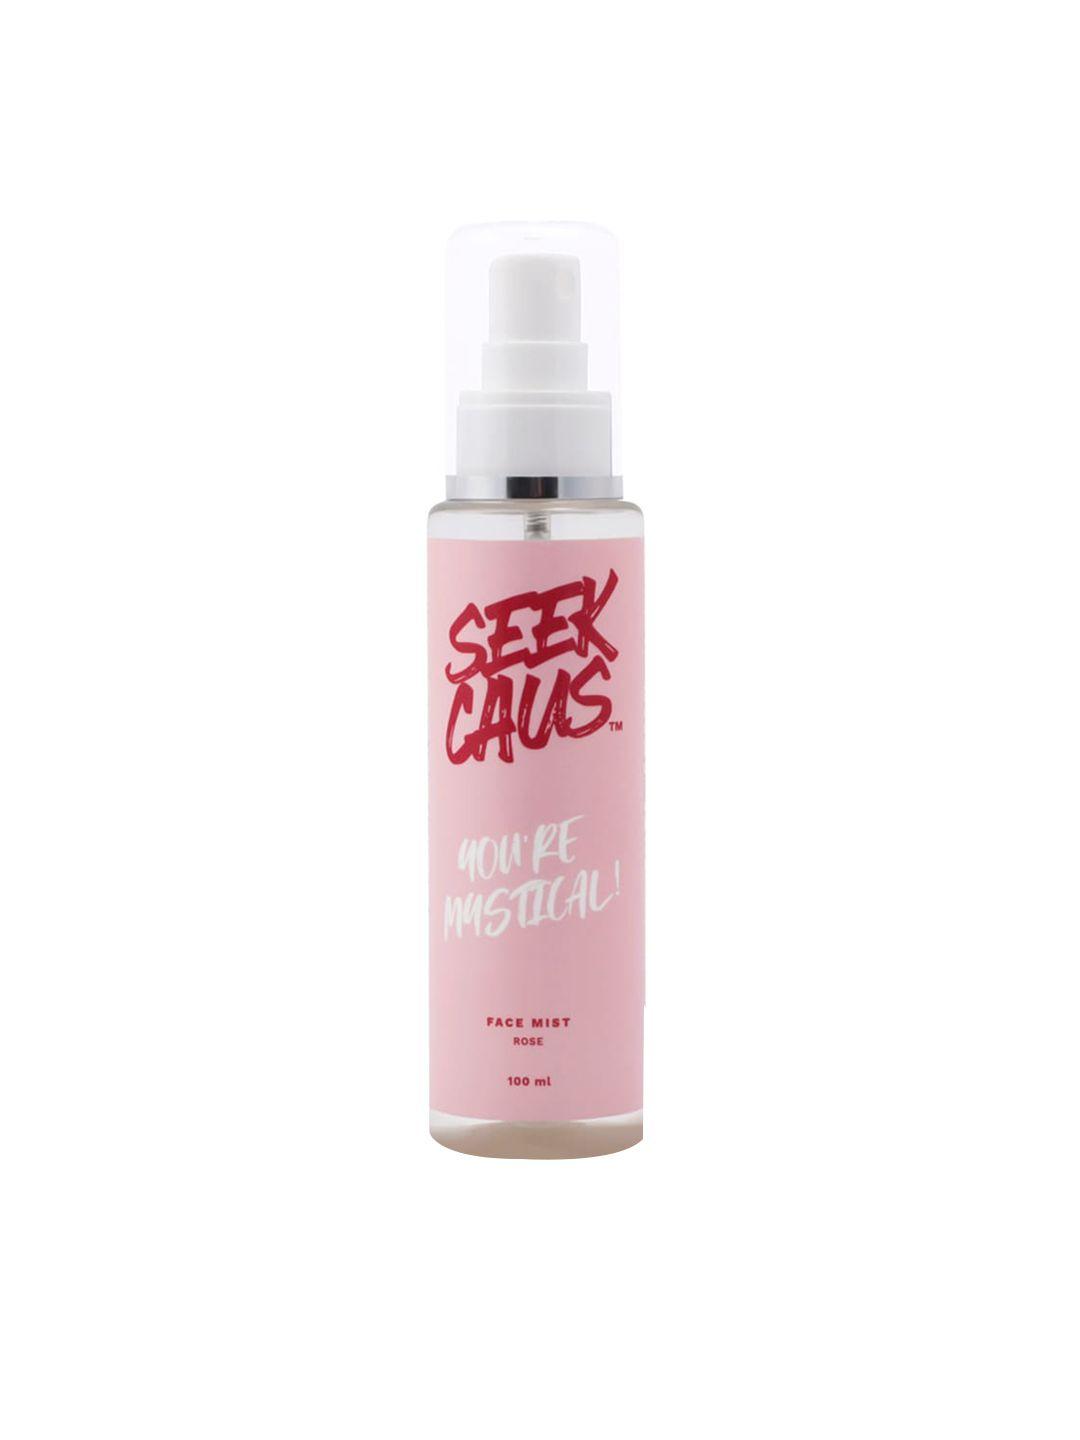 seekcaus you are mystical rose face mist spray - 100 ml